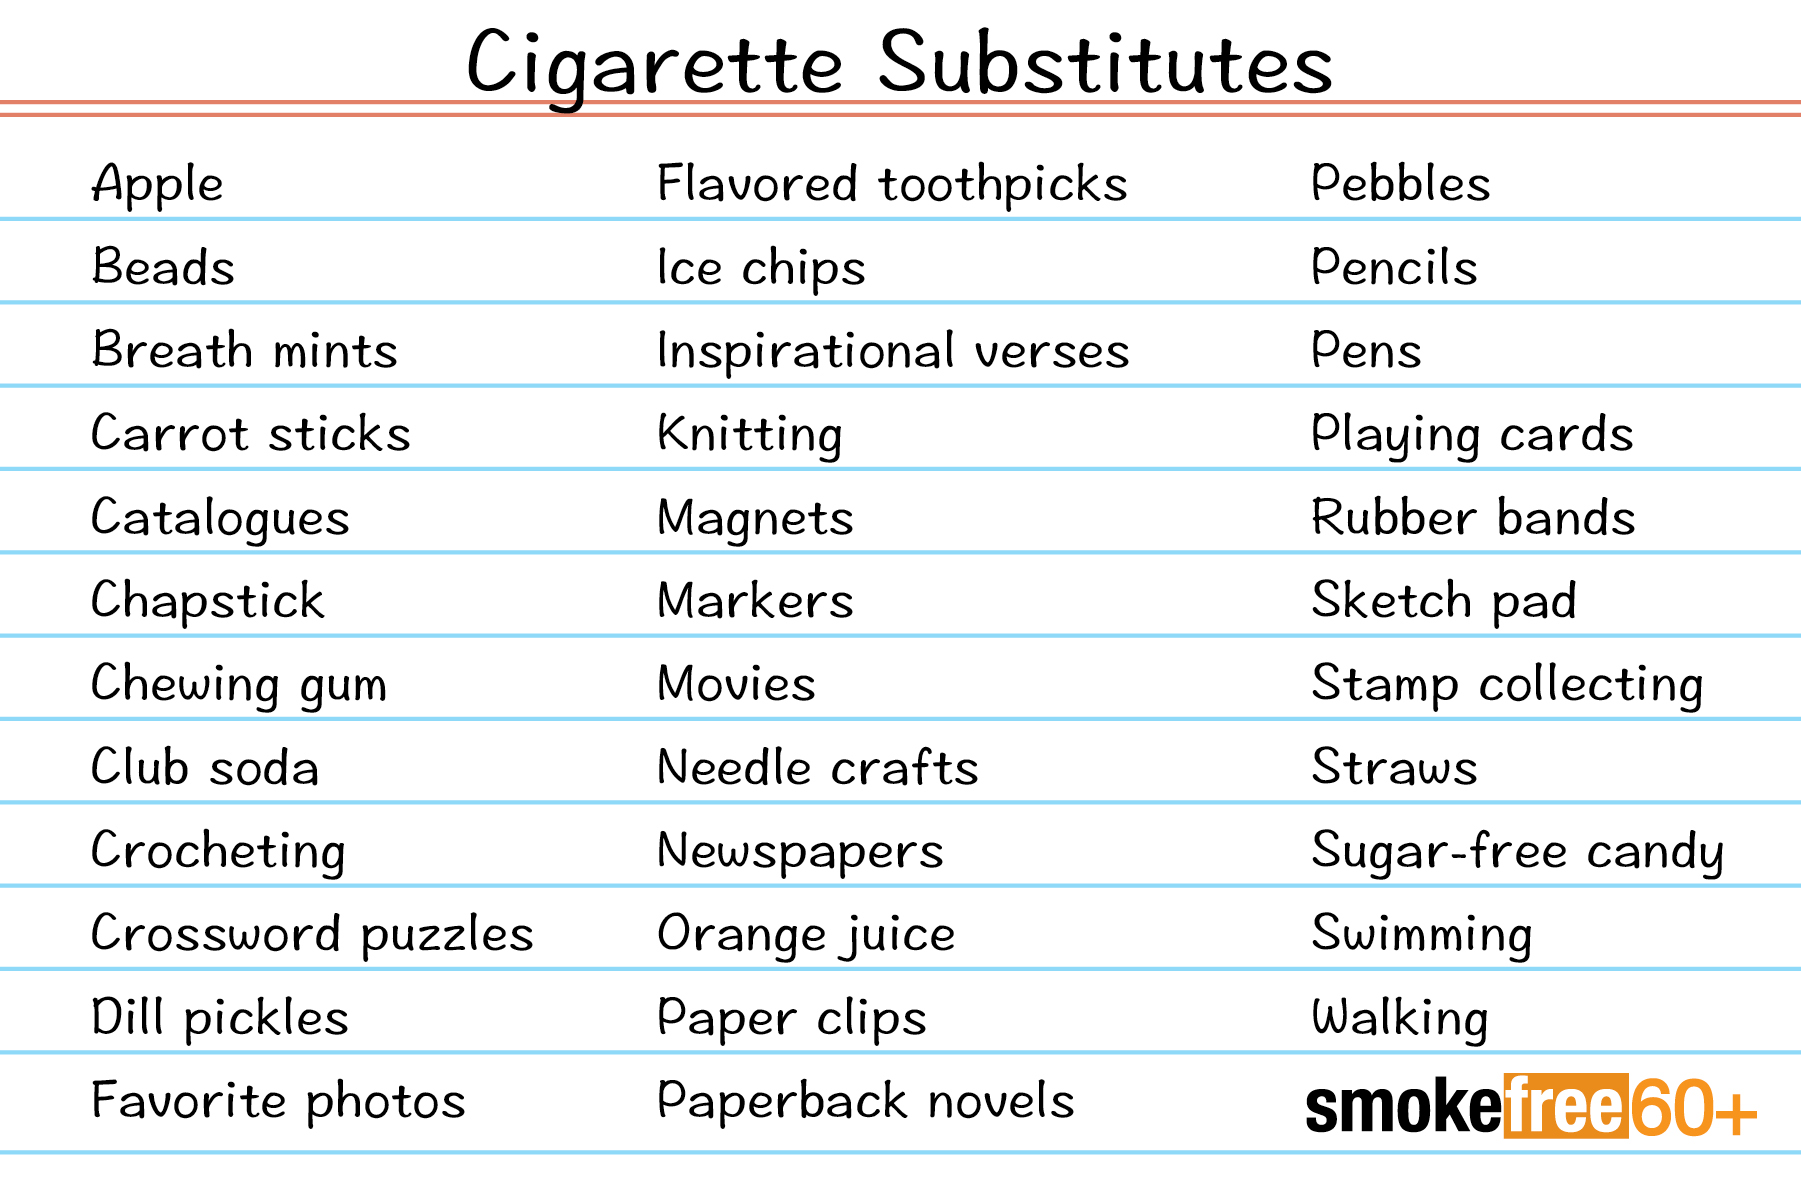 List of Cigarette Substitutes: Apple, Beads, Breath Mints, Carrot Sticks, Catalogues, Chapstick, Chewing Gum, Club Soda, Crocheting, Crossword Puzzles, Dill Pickles, Favorite Photos, Flavored Toothpicks, Ice Chips, Inspirational Verses, Knitting, Magnets, Markers, Movies, needle Crafts, Newspapers, Orange Juice, Paper Clips, Paperback Novels, Pebbles, Pencils, Pens, Playing Cards, Rubber Bands, Sketch Pad, Stamp Collecting, Straws, Sugar-free candy, Swimming, Walking. Smokefree 60+.